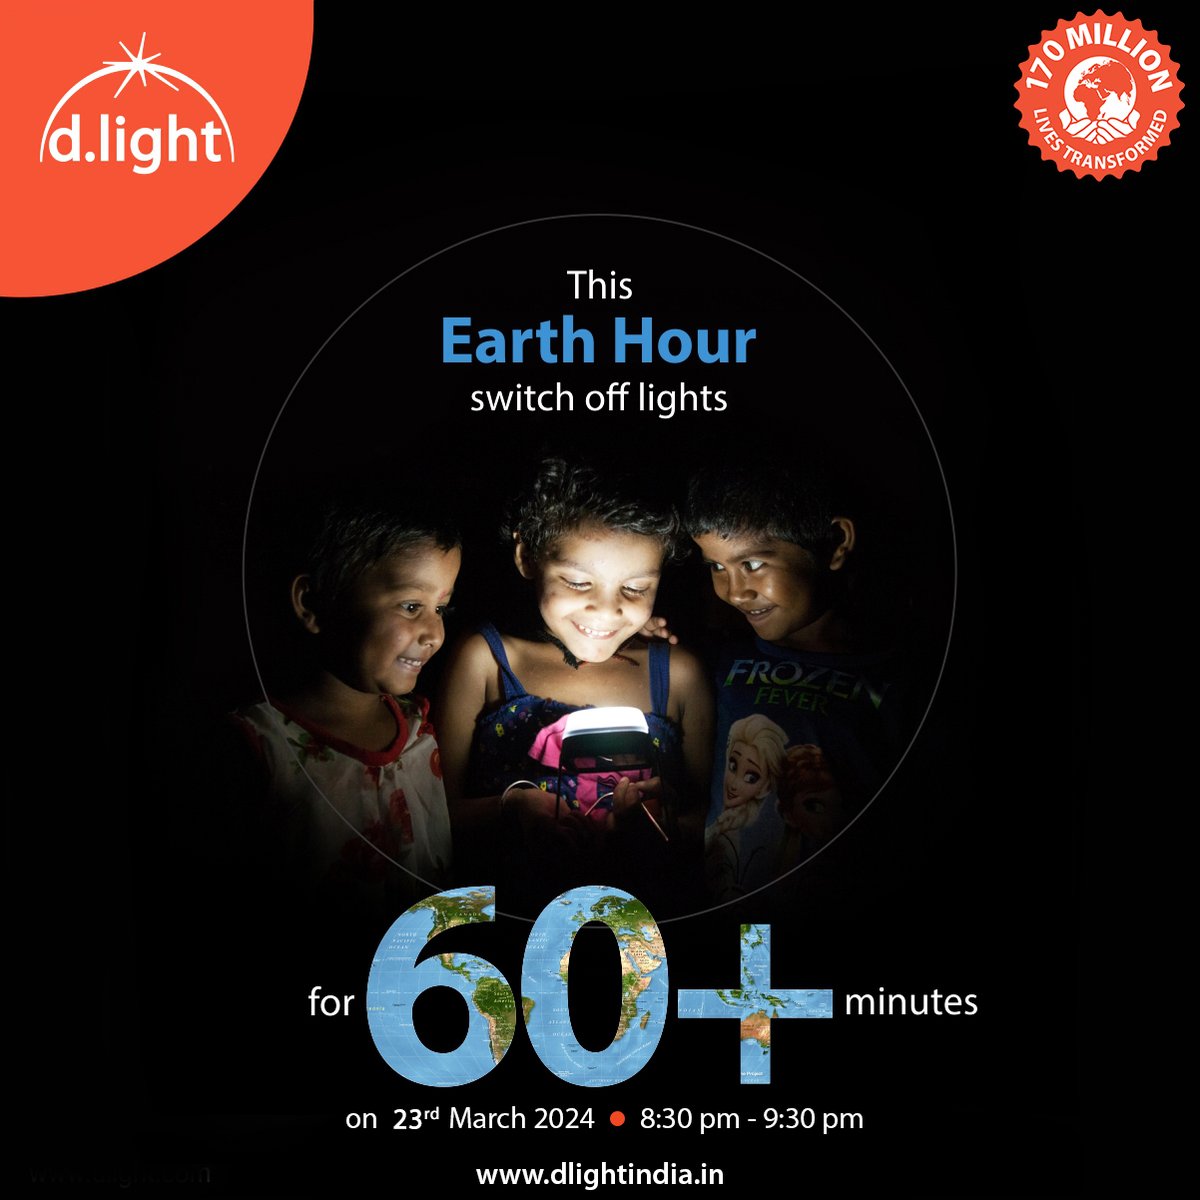 This Earth Day, let's make a pledge to the planet! Join us in switching off your lights today from 8:30pm to 9:30pm and make Earth shine. Together, we can make a difference for a brighter, more sustainable future.

#dlightIndia #MakingLifeBrighter #EarthHour #SwitchOffForEarth